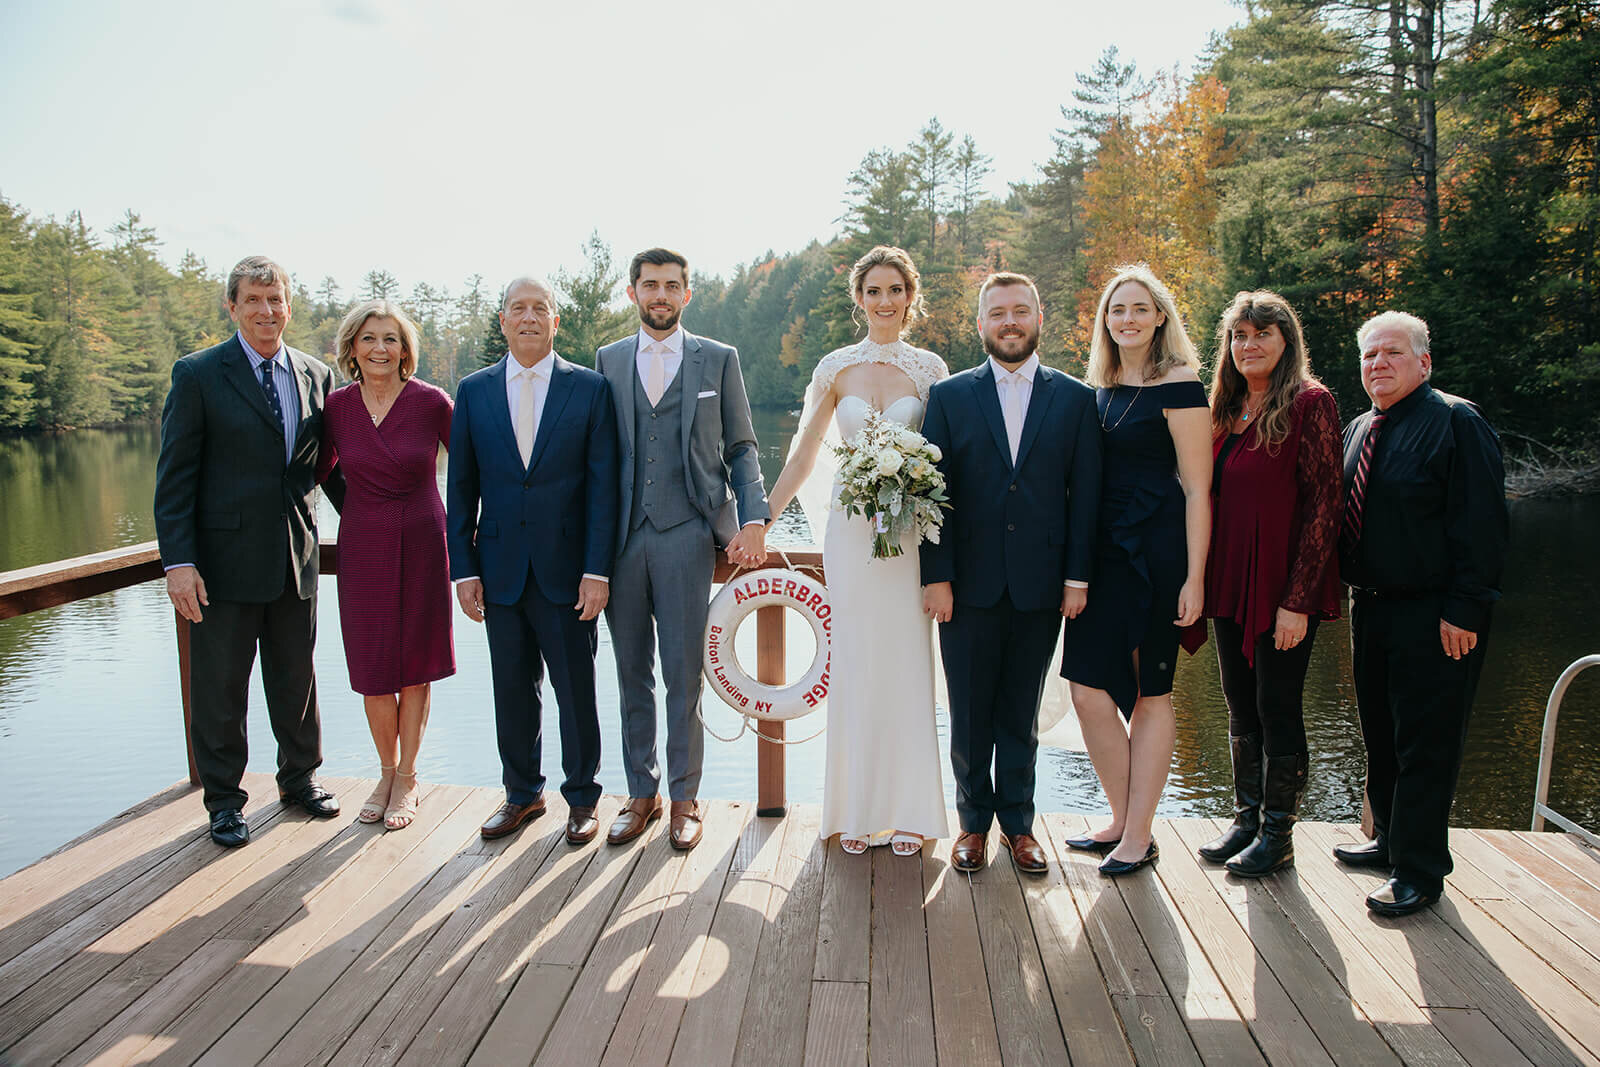  Formal family portrait on dock at beautiful lake lodge in the Adirondacks in Upstate New York. 